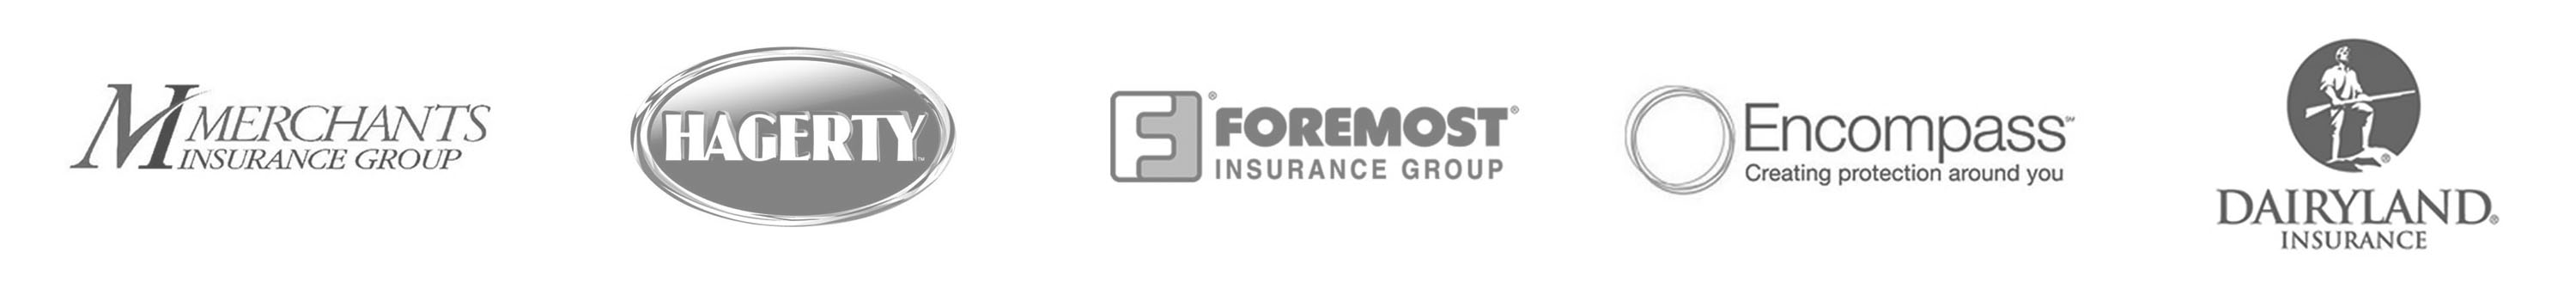 Company logos of Merchants Insurance Group, Hagerty, Foremost Insurance, Encompass, and Dairyland Insurance